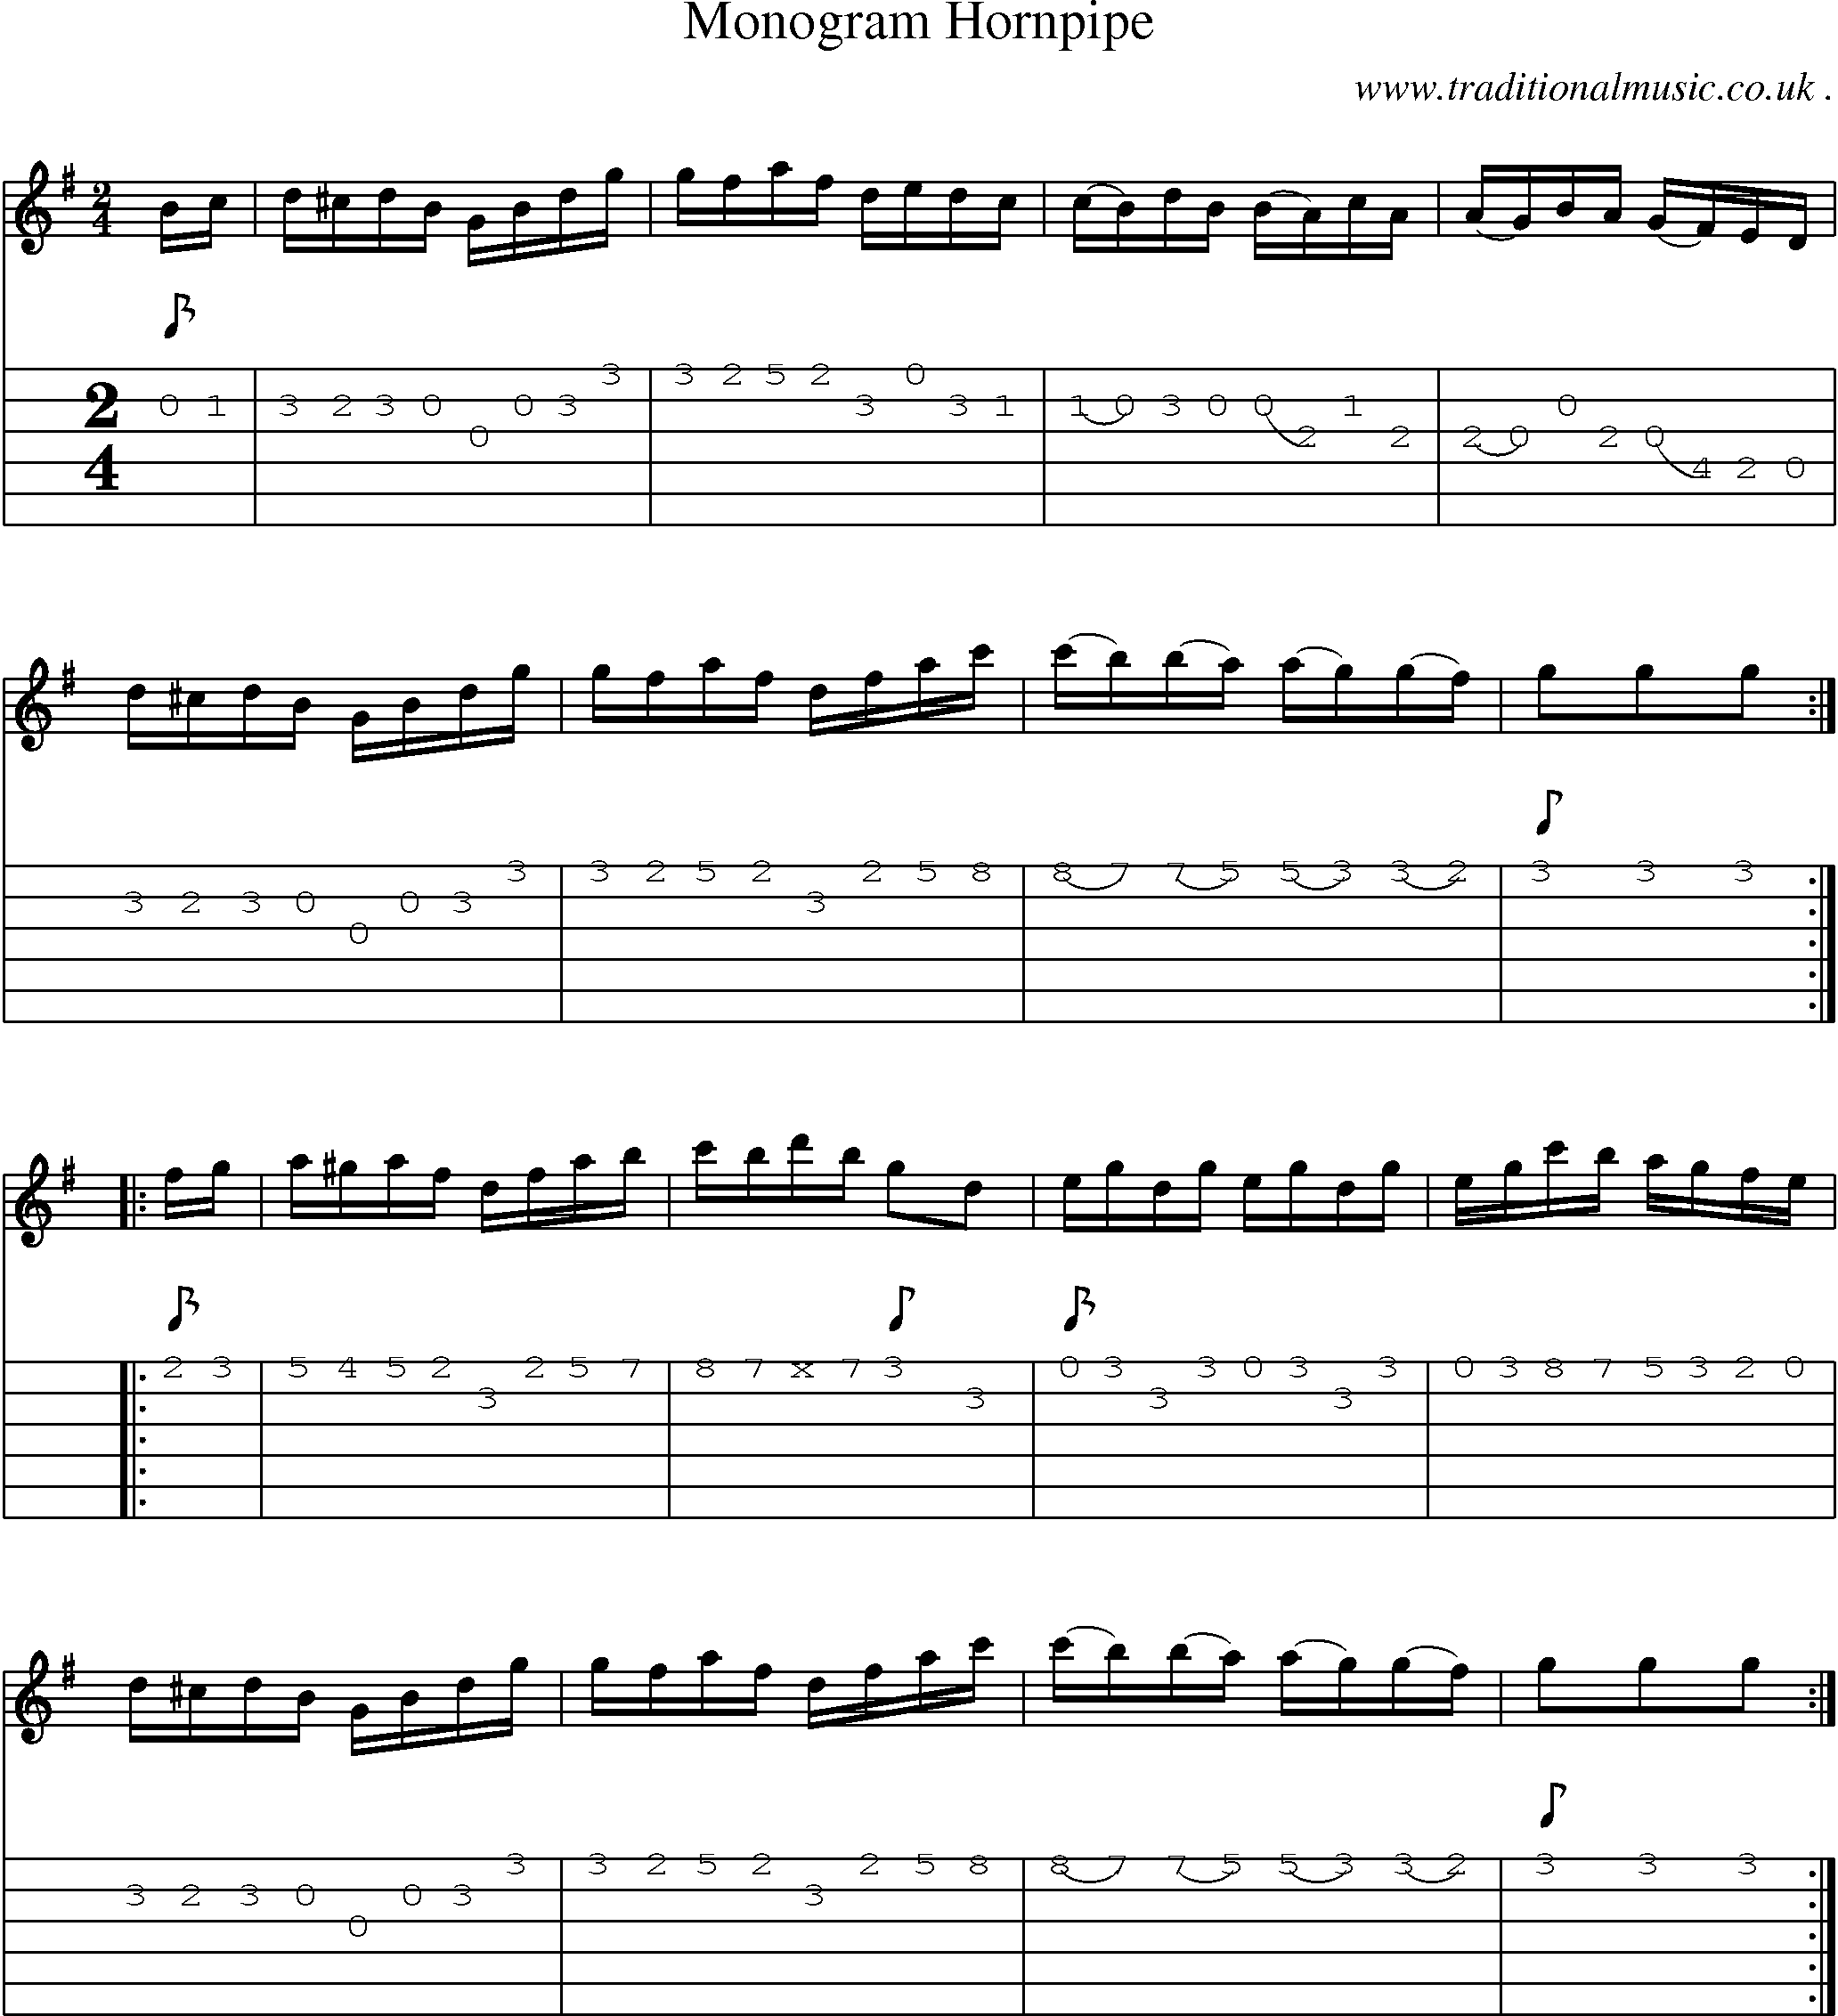 Sheet-Music and Guitar Tabs for Monogram Hornpipe